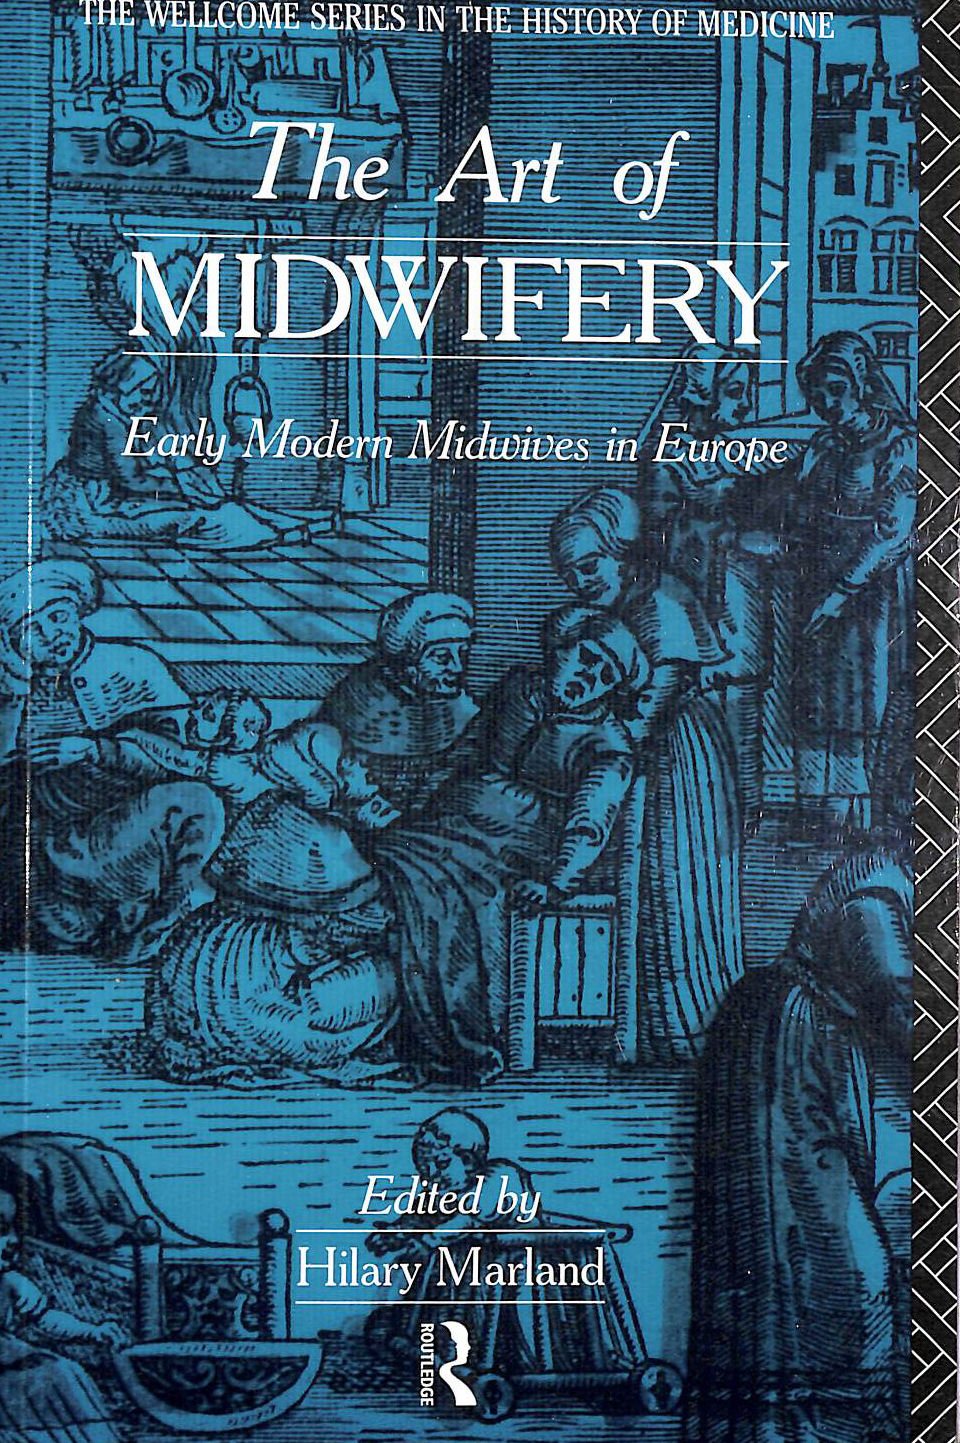 MARLAND, HILARY - The Art of Midwifery: Early Modern Midwives in Europe (Wellcome Institute Series in the History of Medicine)